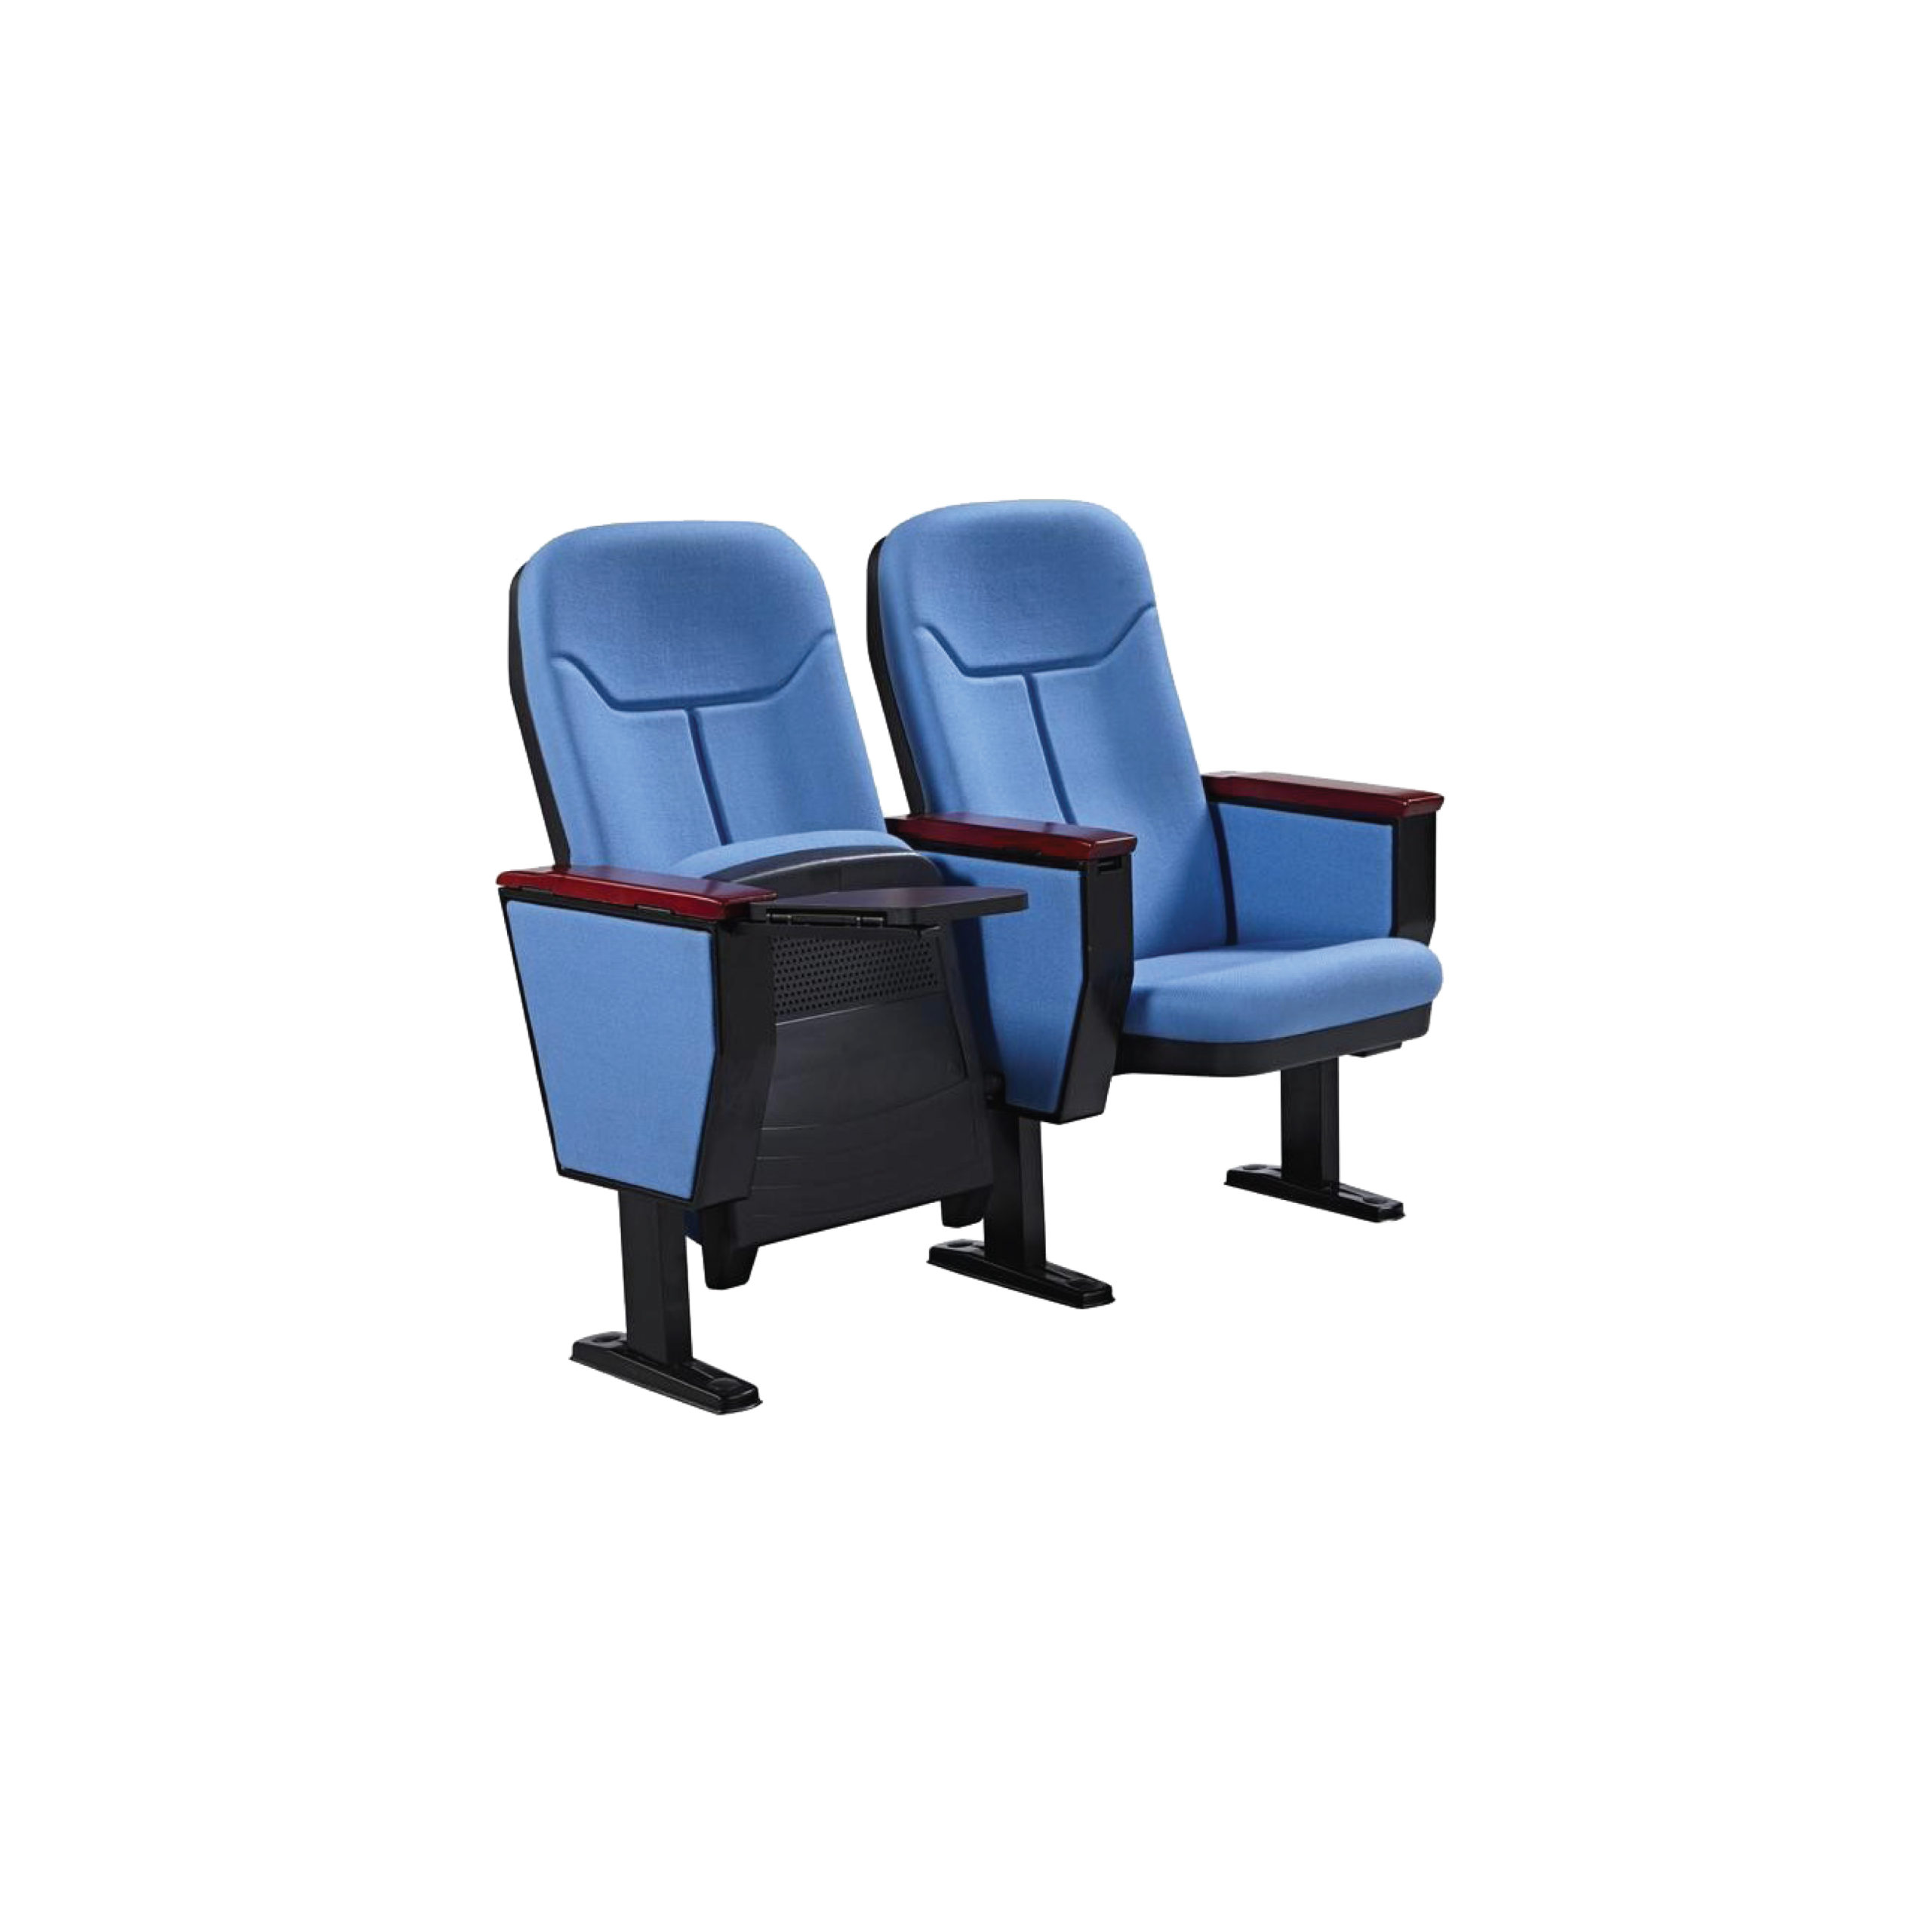 THEATER CHAIRS كراسي مسرح